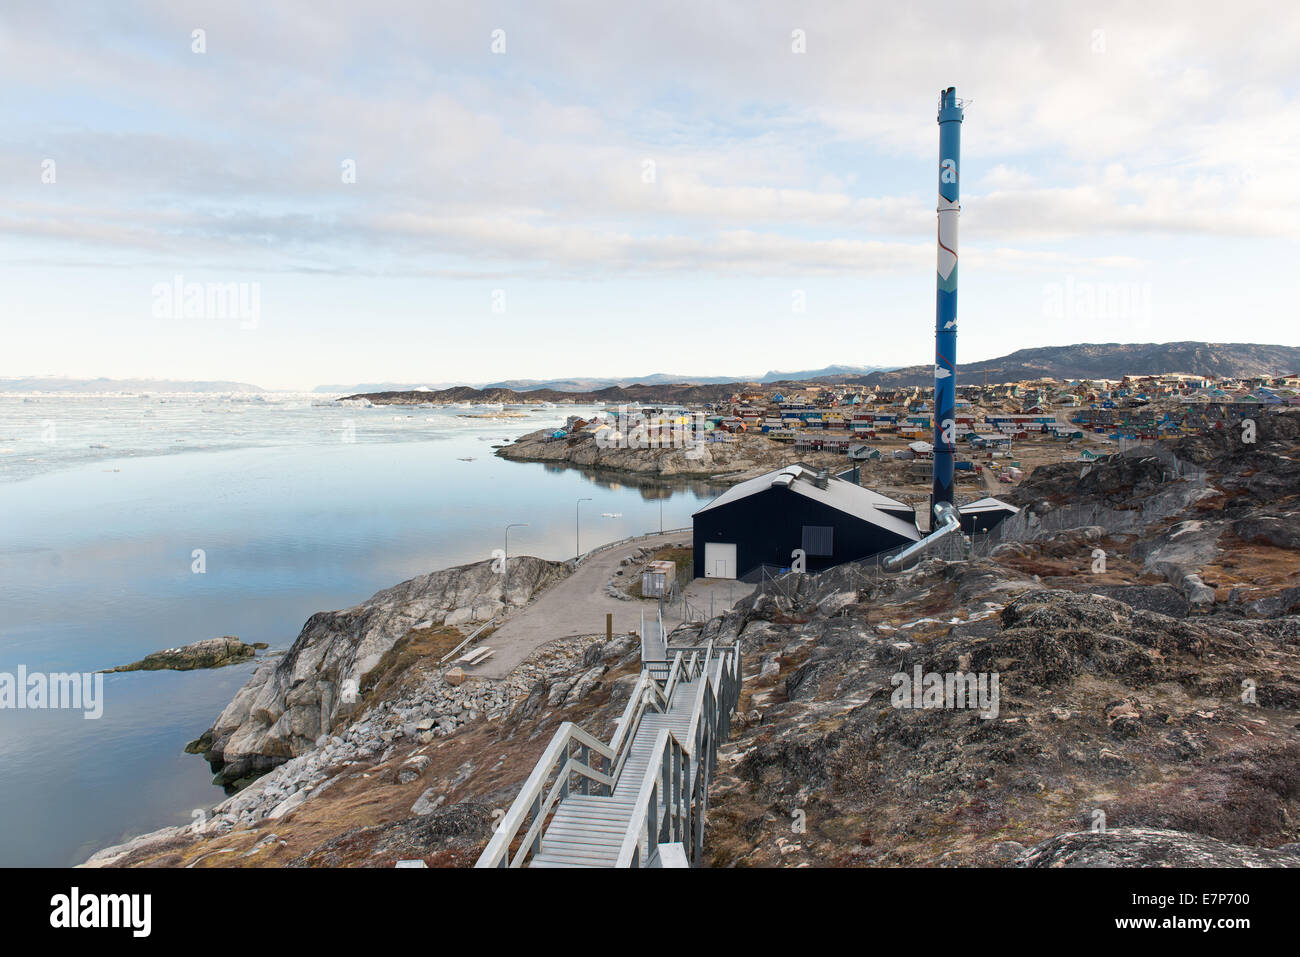 Illulissat in Greenland with power station, sea and mountains Stock Photo